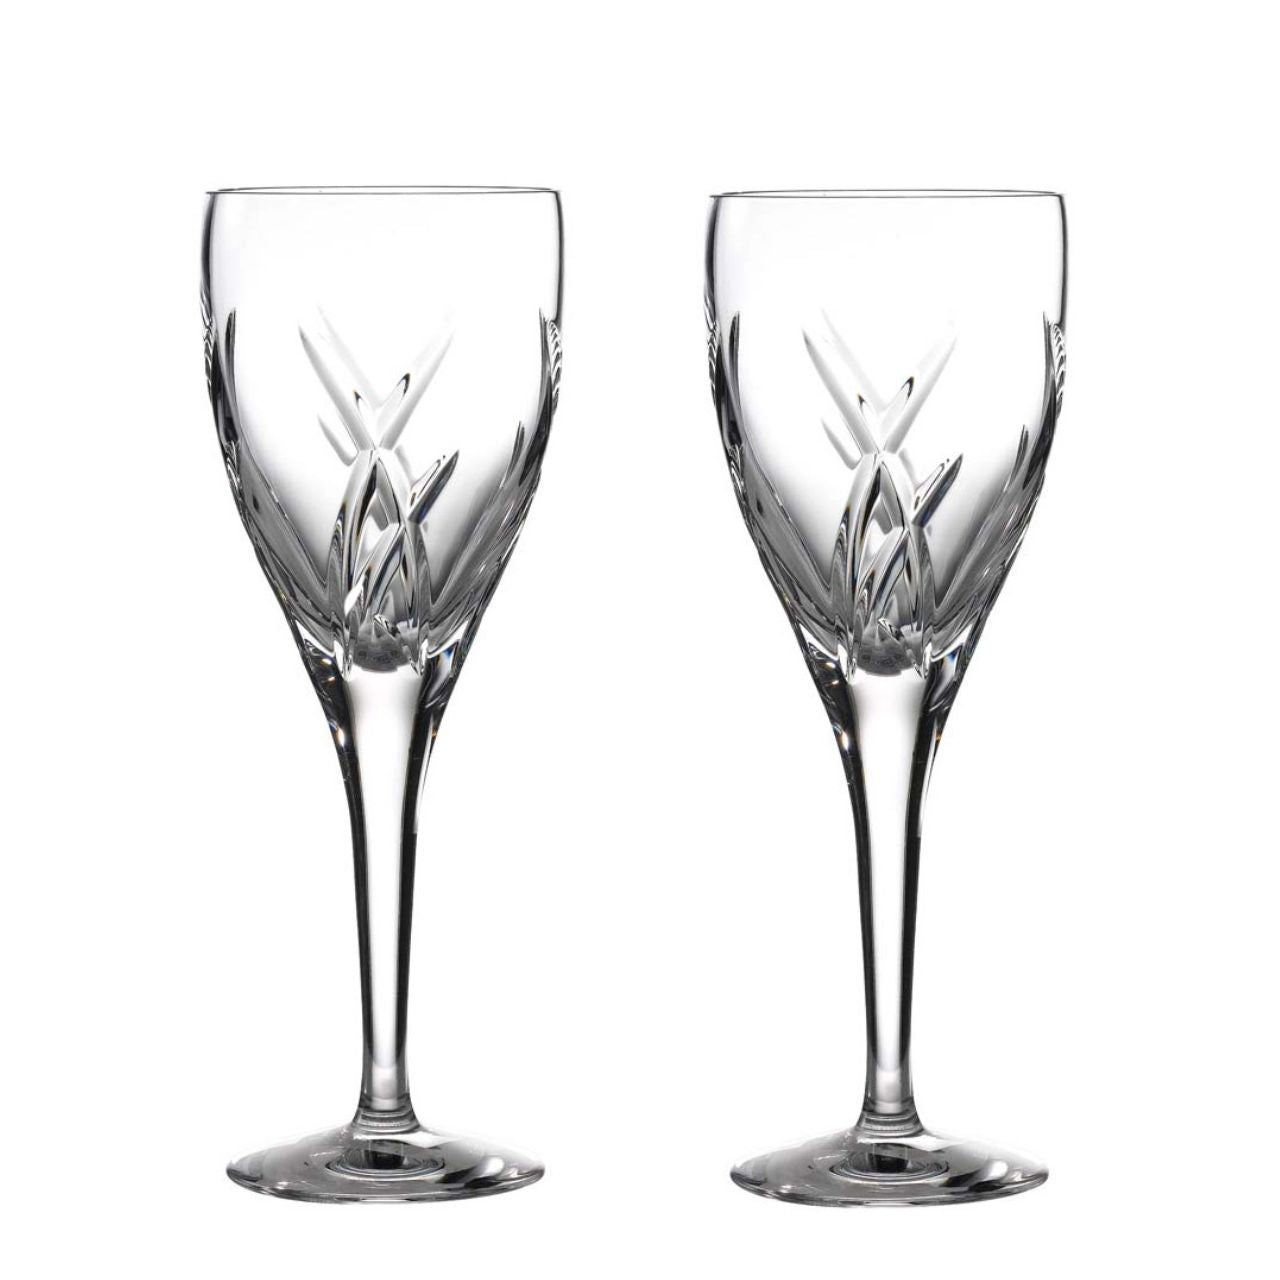 John Rocha Crystal Signature Red Wine Pair by Waterford  John Rocha contemporary collection Signature Red Wine Glasses. John Rocha's name is synonymous with simple, elegant and modern design which captures the clarity and purity expected of Waterford Crystal.